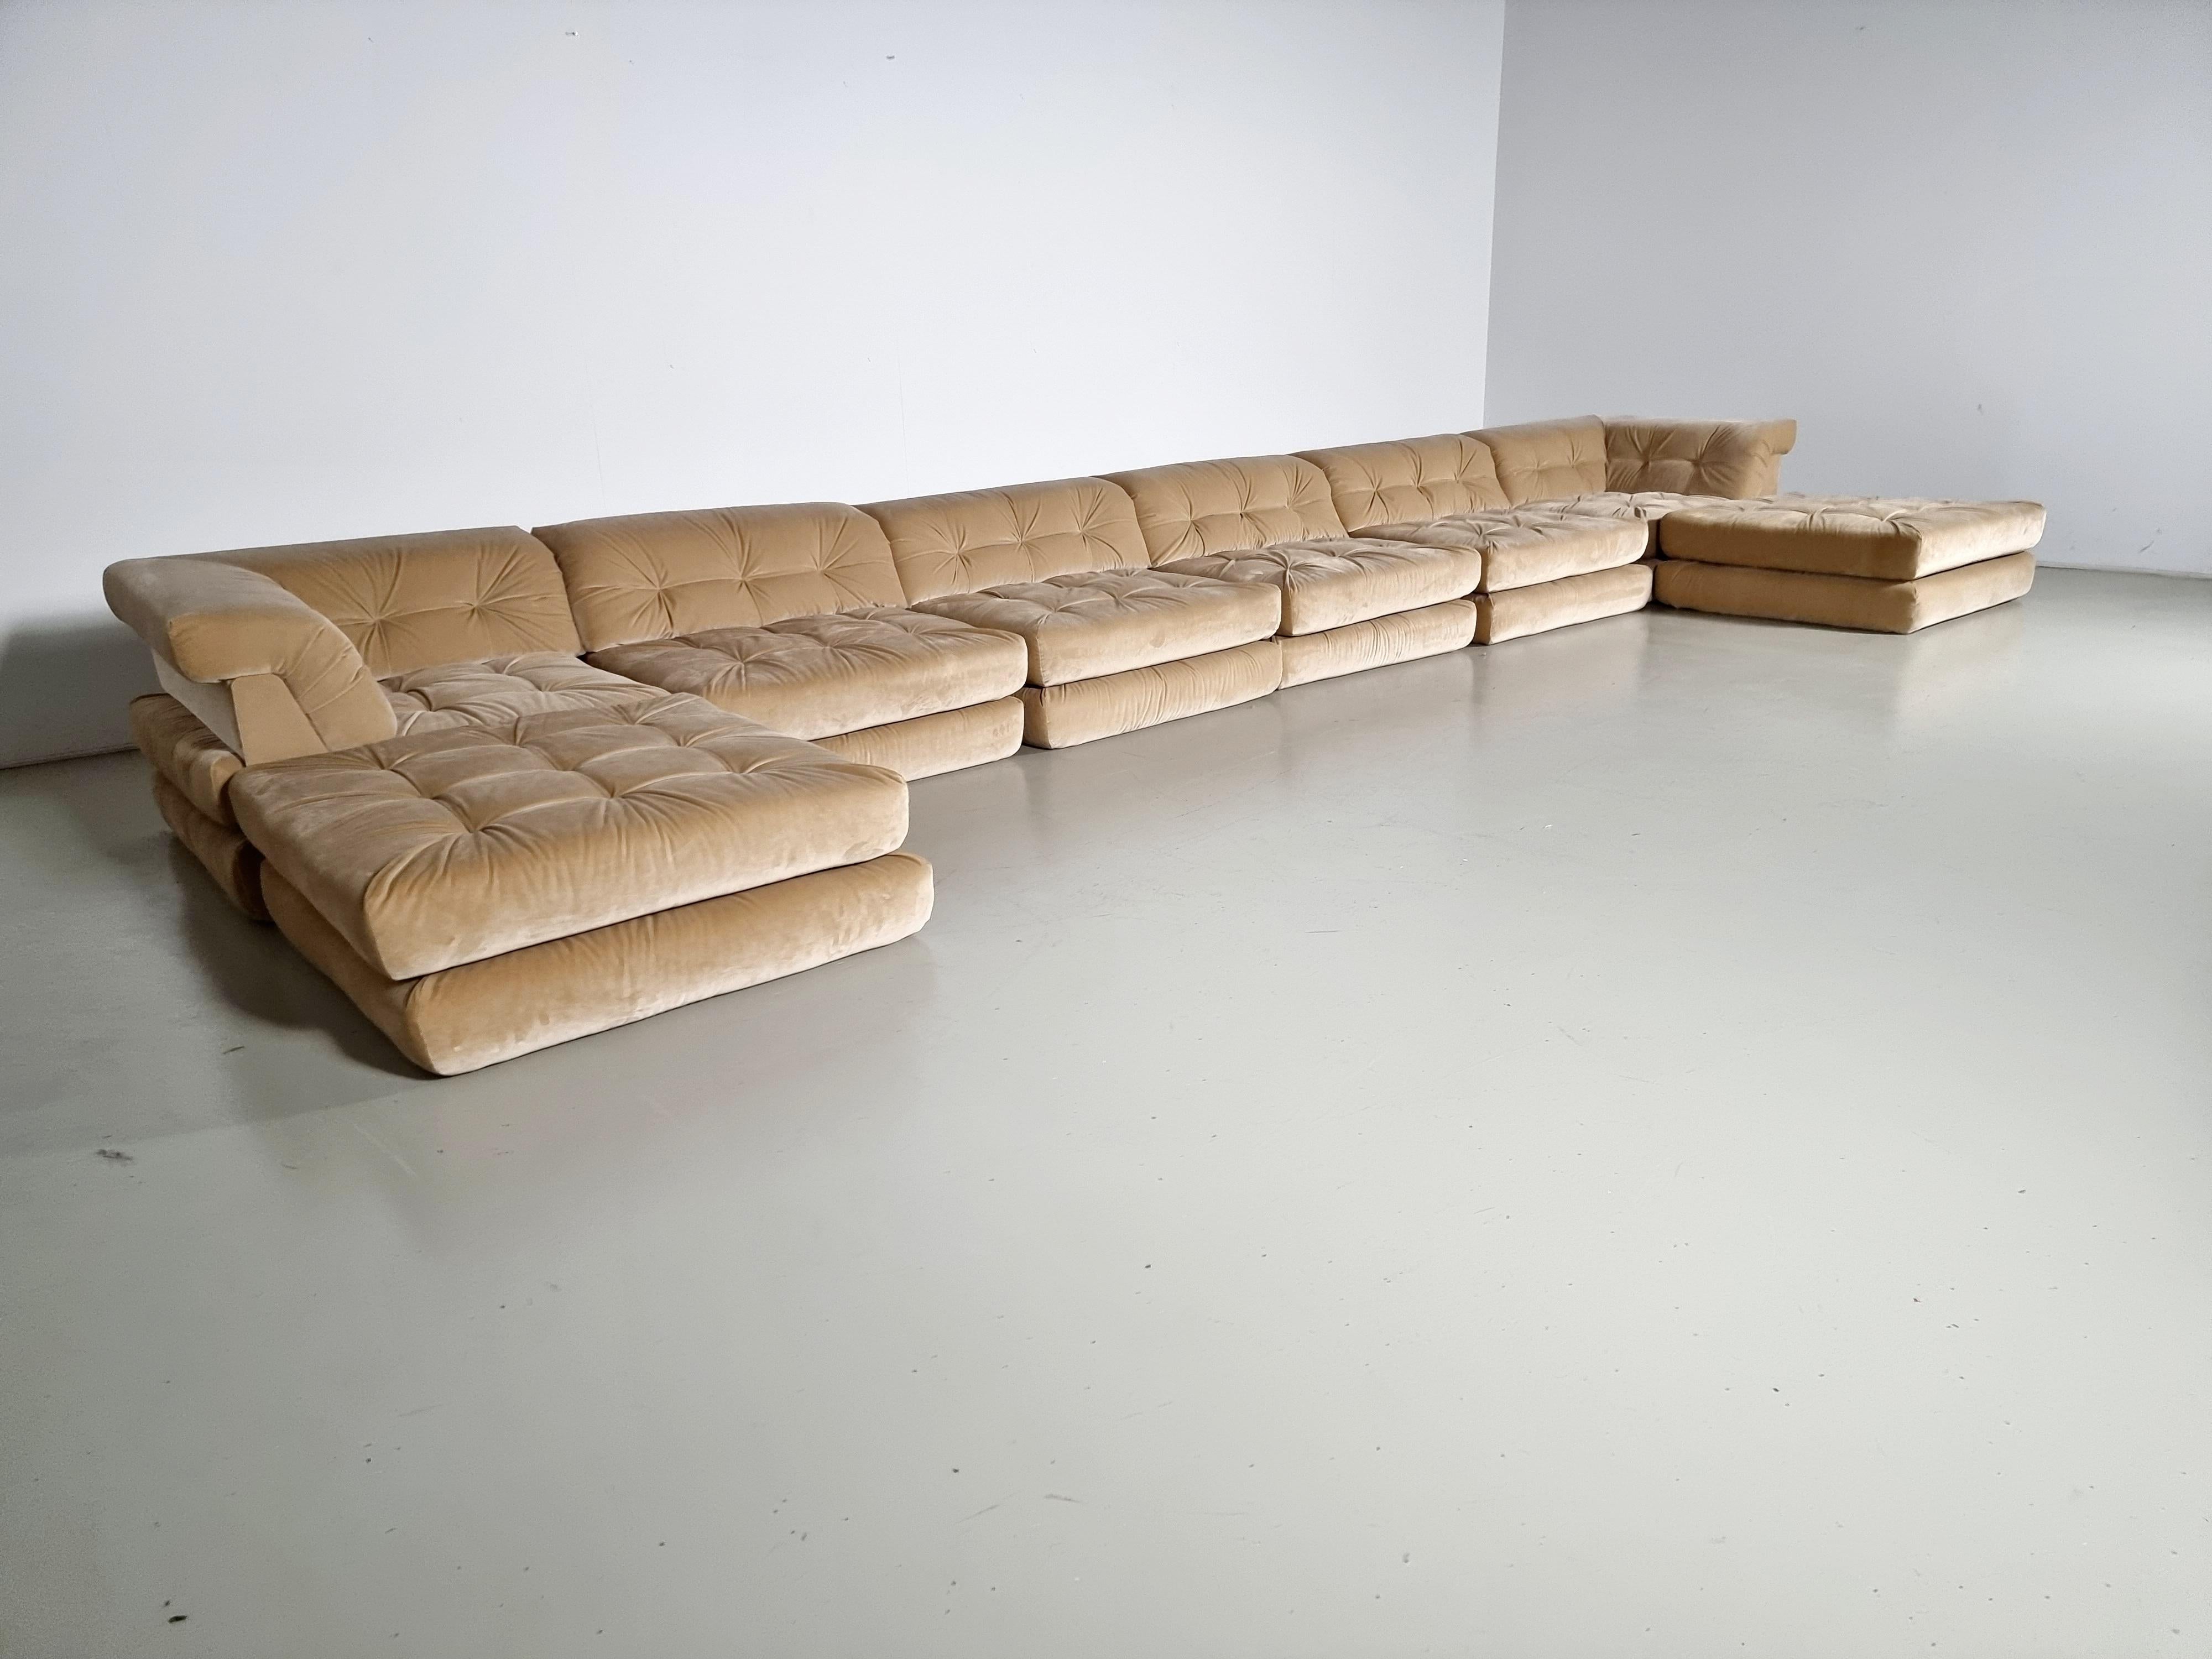 Huge 1st Edition Mah Jong modular landscape sofa set by Hans Hopfer, designed in 1971 for Roche Bobois. It features multiple cushions that can be arranged in an endless number of ways, This set includes 16 cushions and 6 backrests. 

Hopfer’s Mah